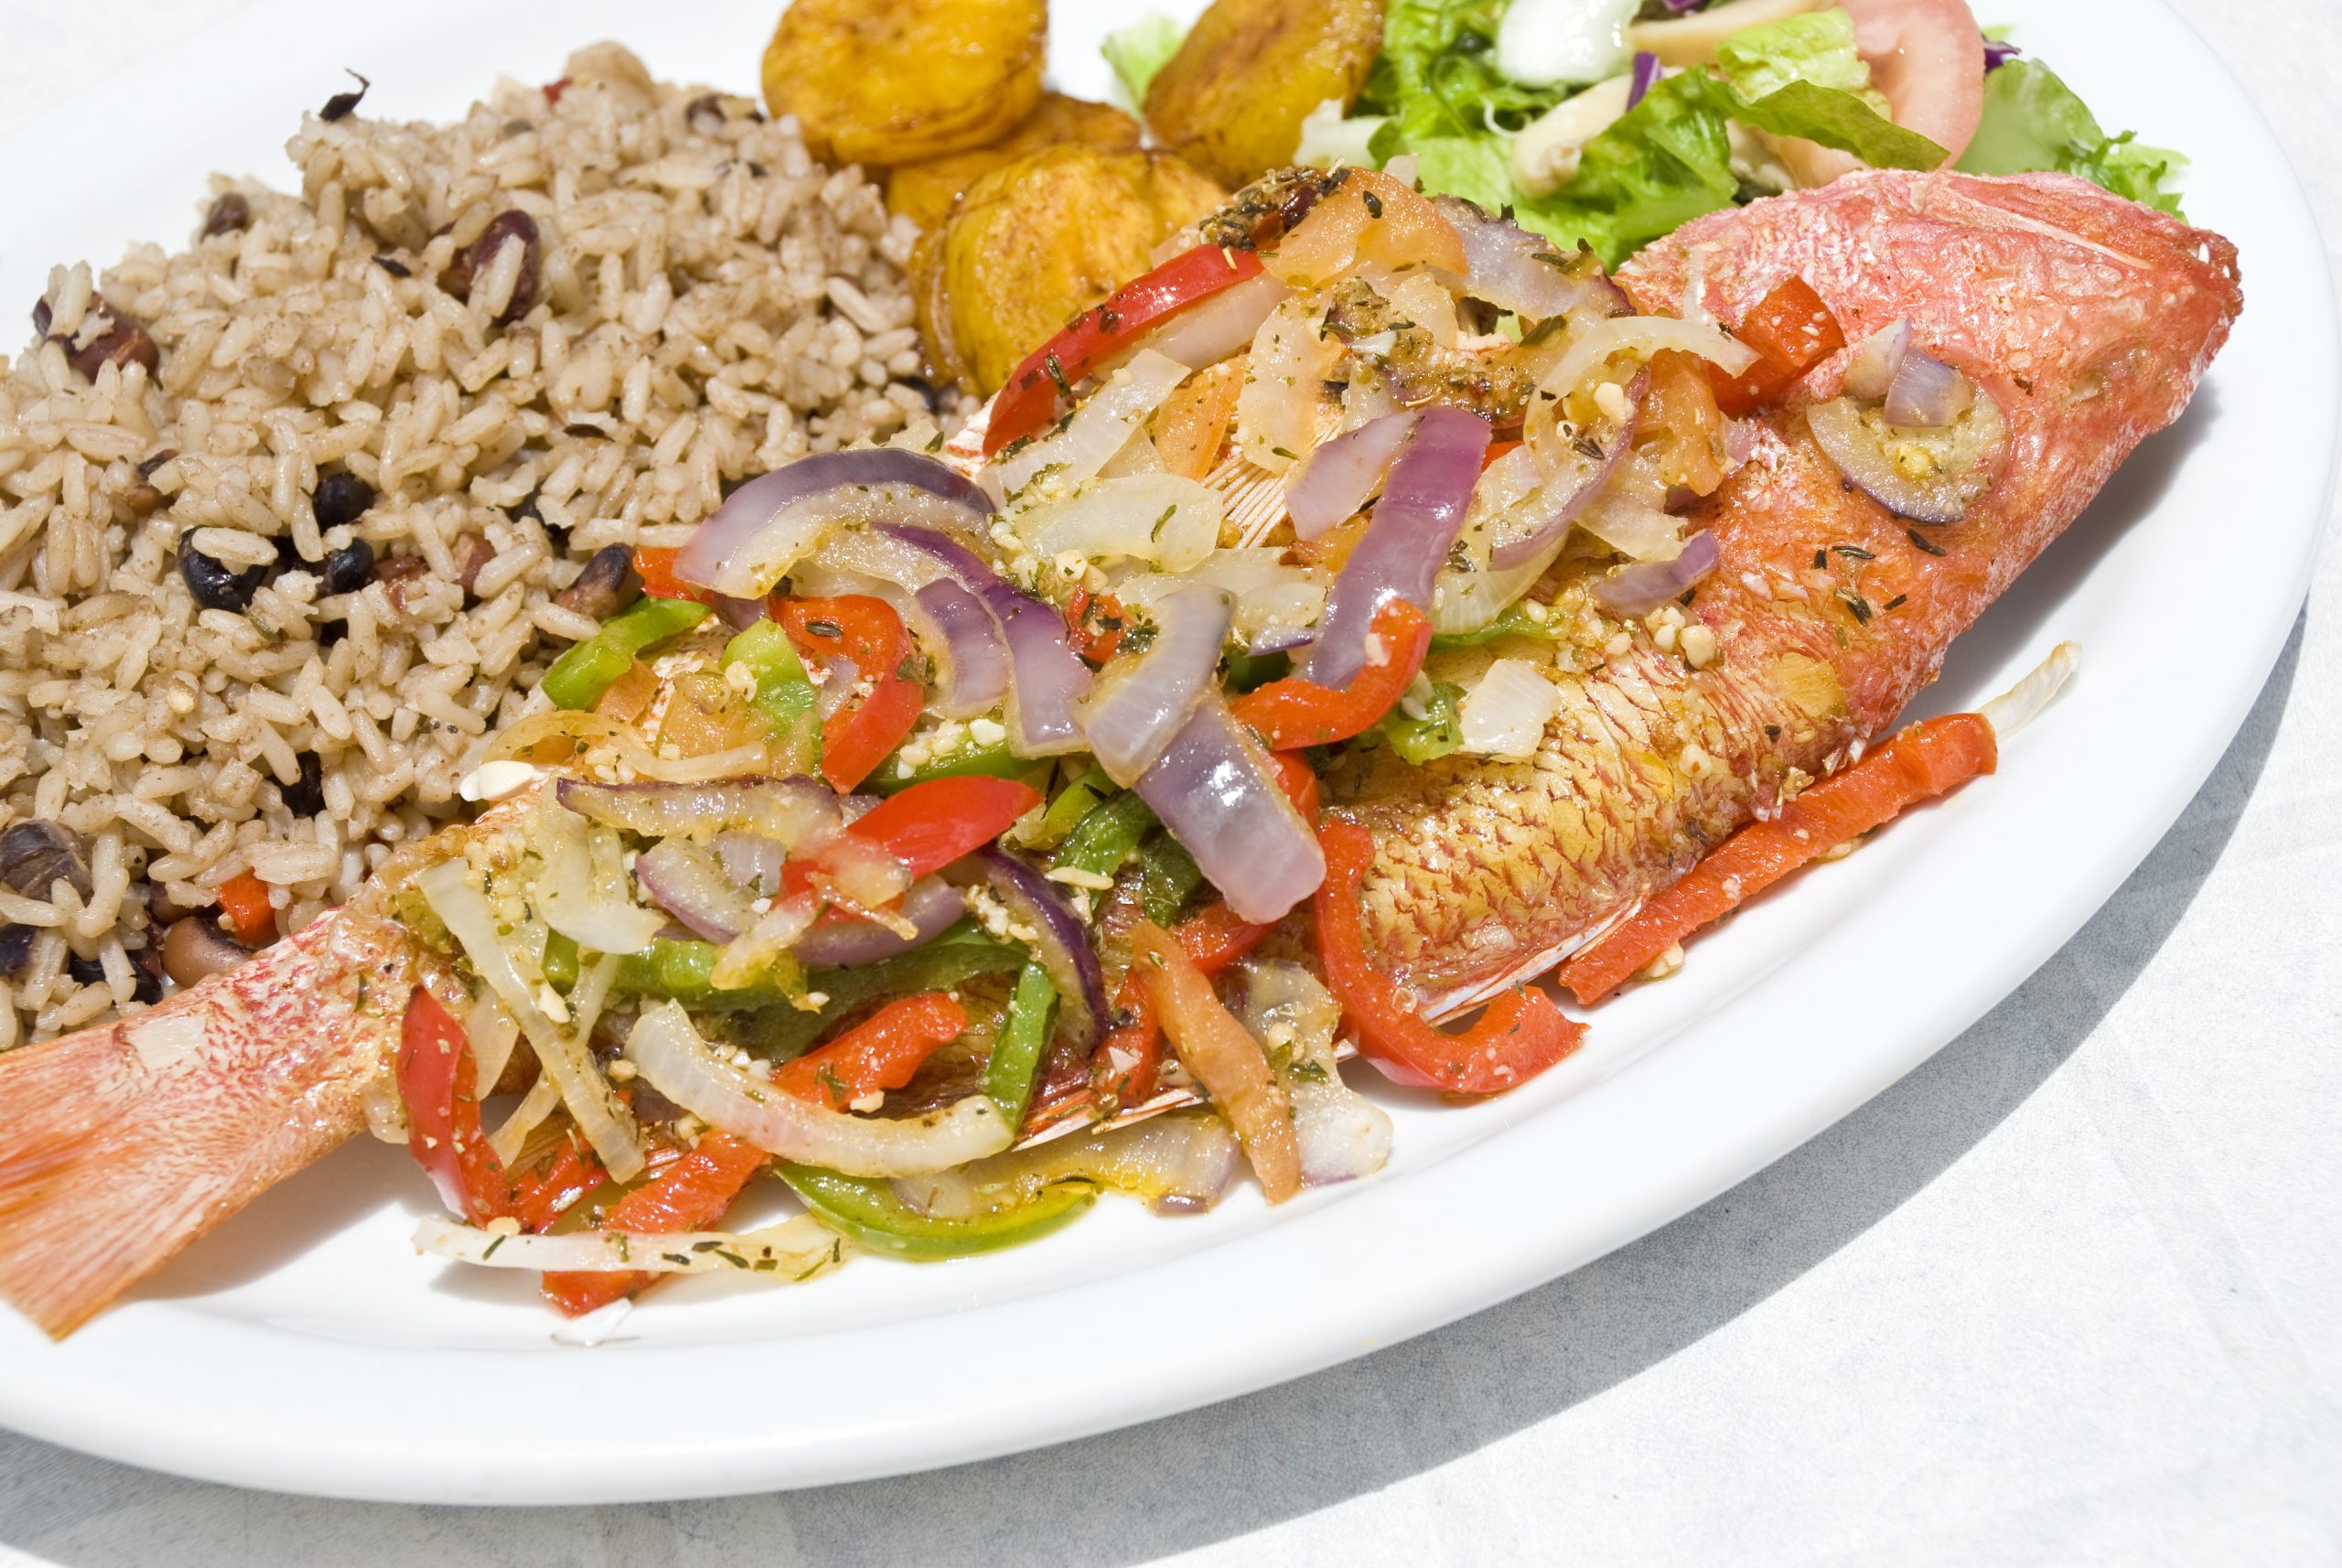 Cayman’s traditional Fish Fry – enjoy our culinary heritage at its best this Easter!   